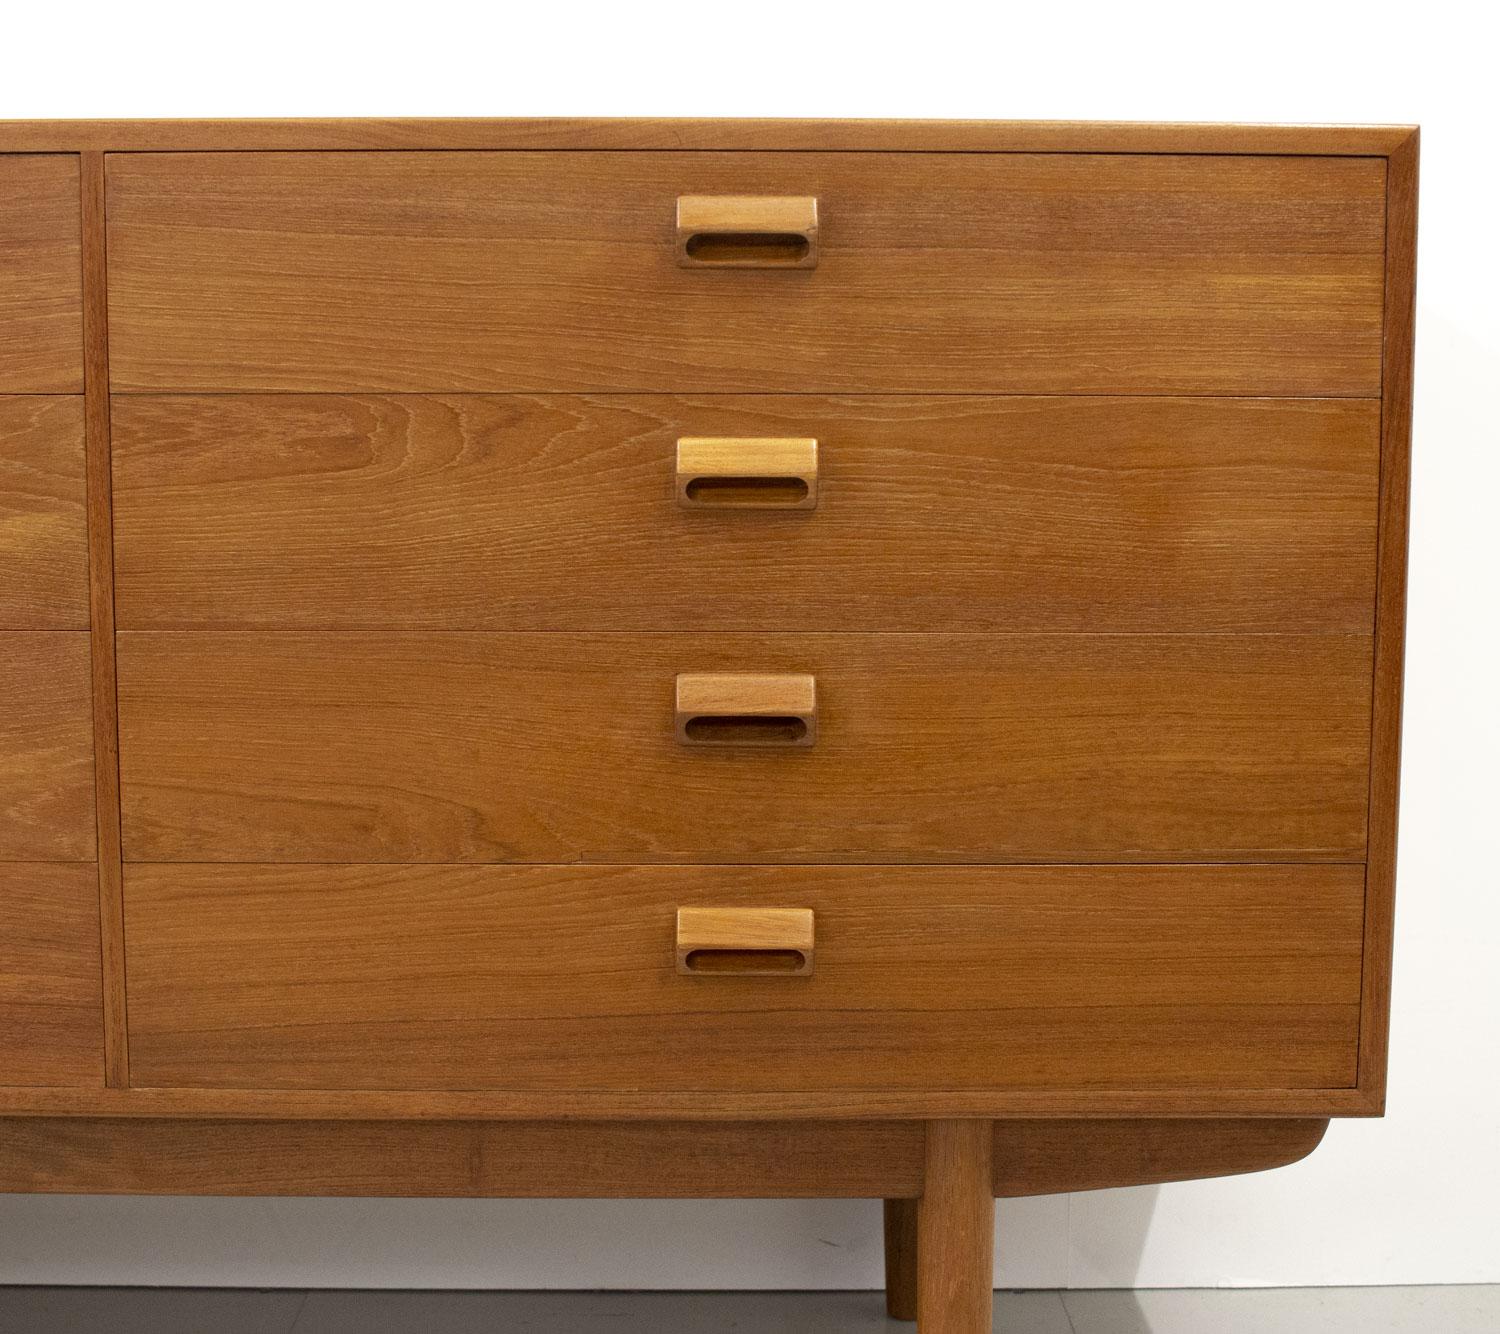 Oiled Danish Large Teak Chest of Drawers by Borge Mogensen for Soborg, 1950s For Sale